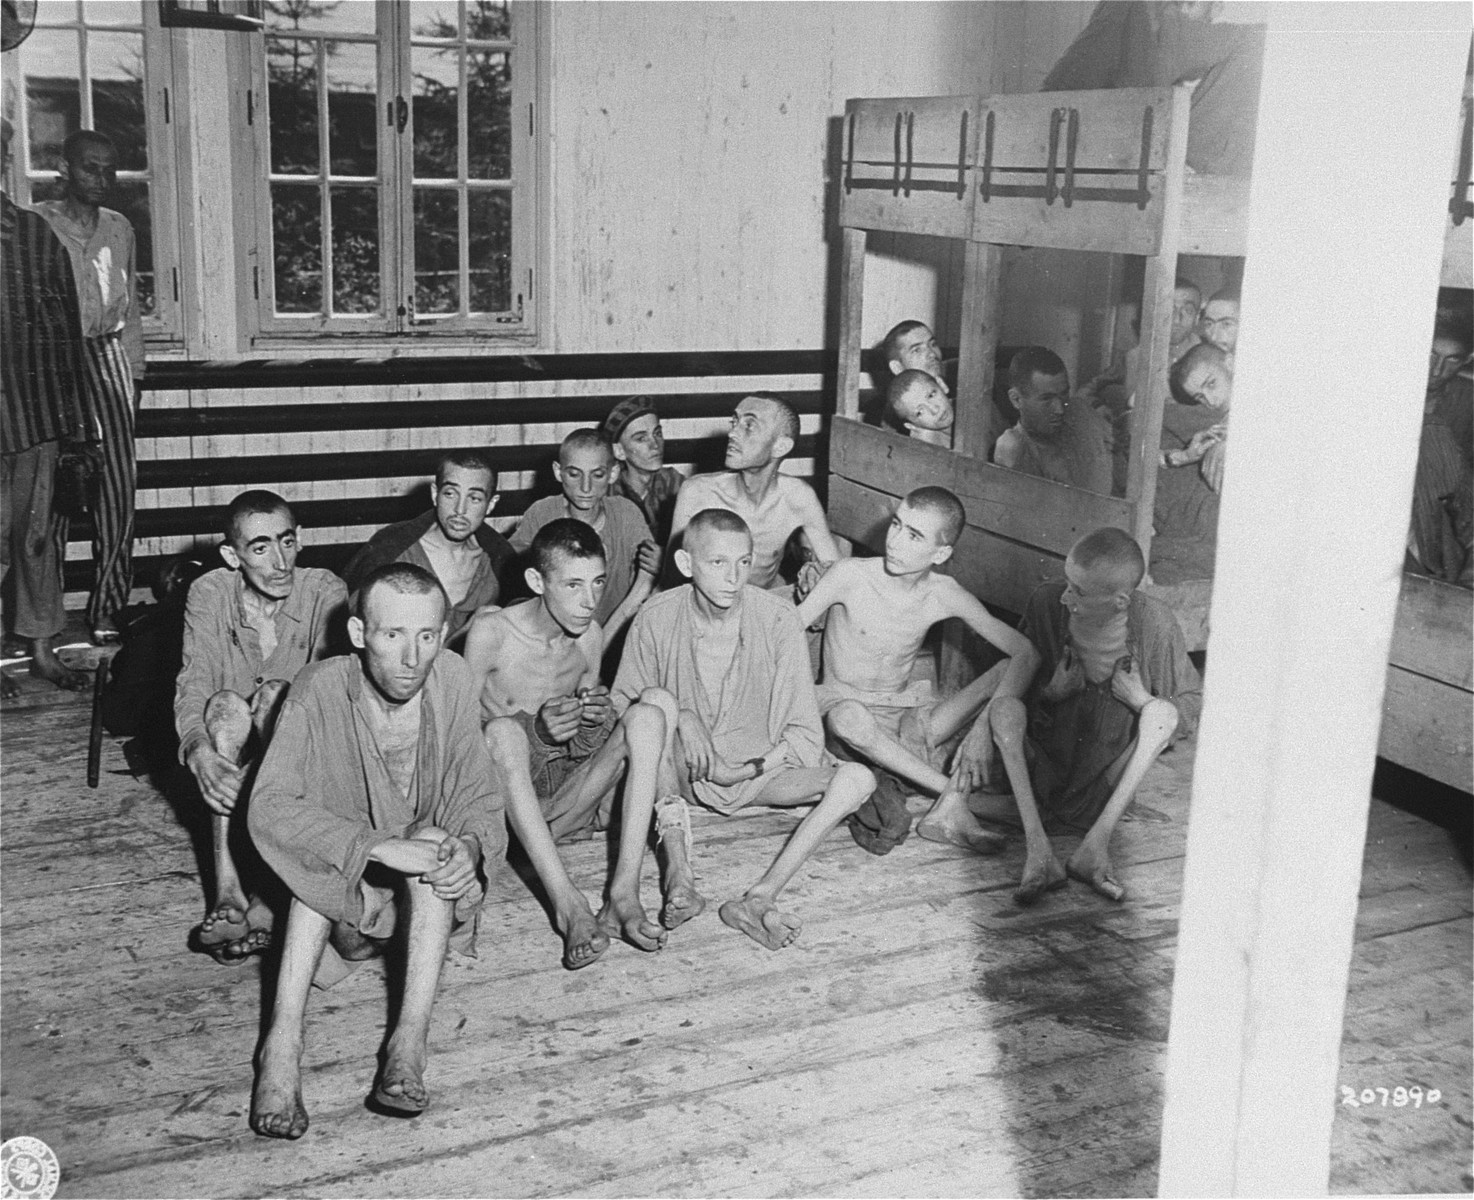 A group of emaciated survivors in the infirmary barracks for Jewish prisoners in the Ebensee concentration camp.

Among those pictured is George Havas (front row, second from the right).